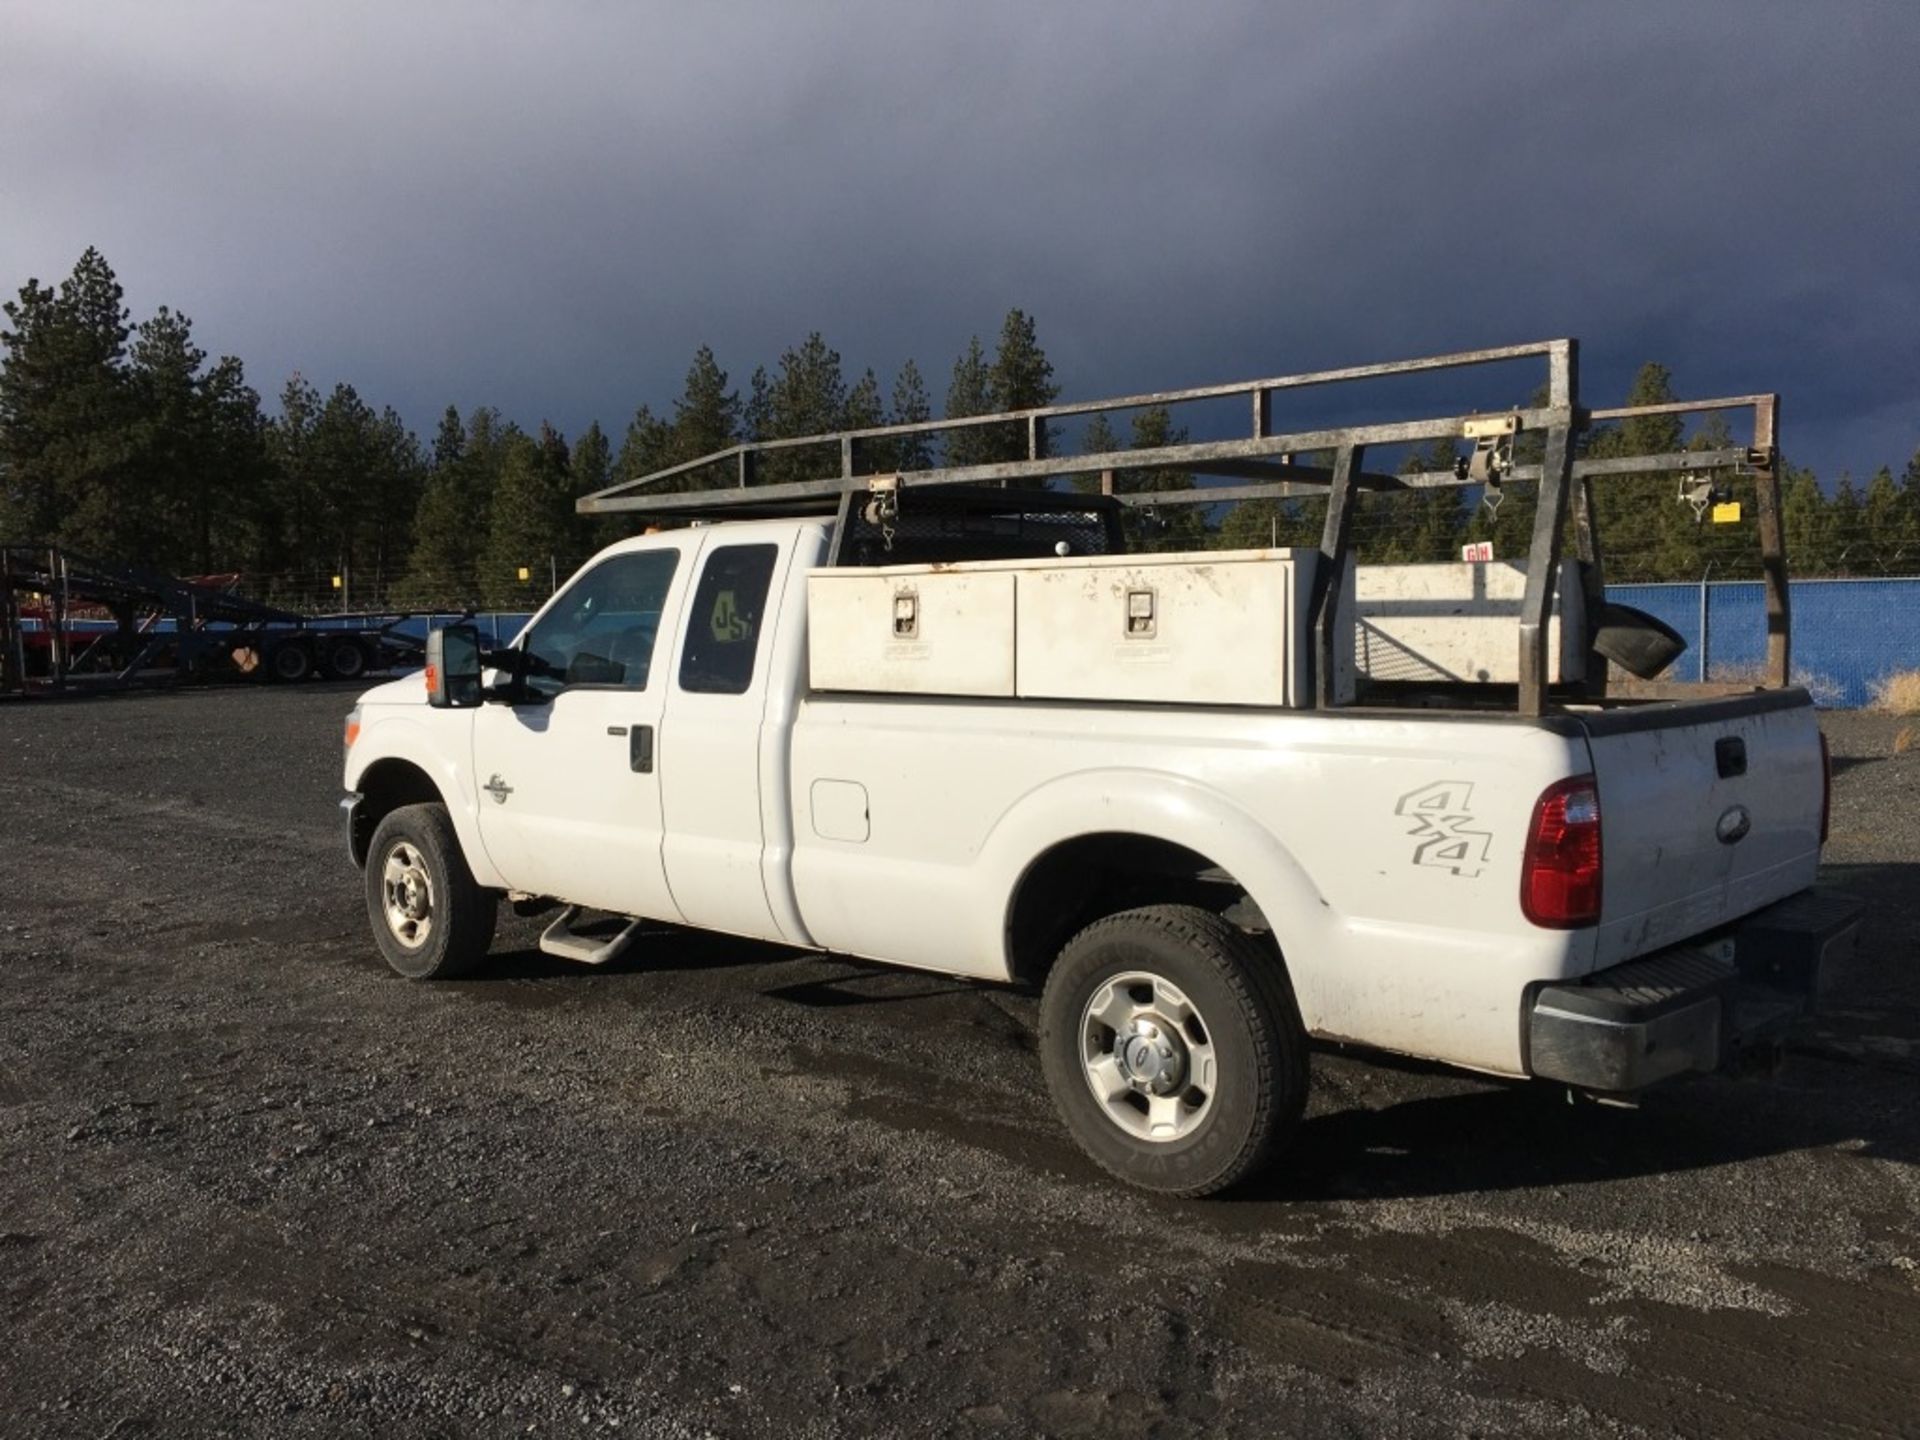 2012 Ford F250 XLT 4x4 Extra Cab Pickup - Image 3 of 28